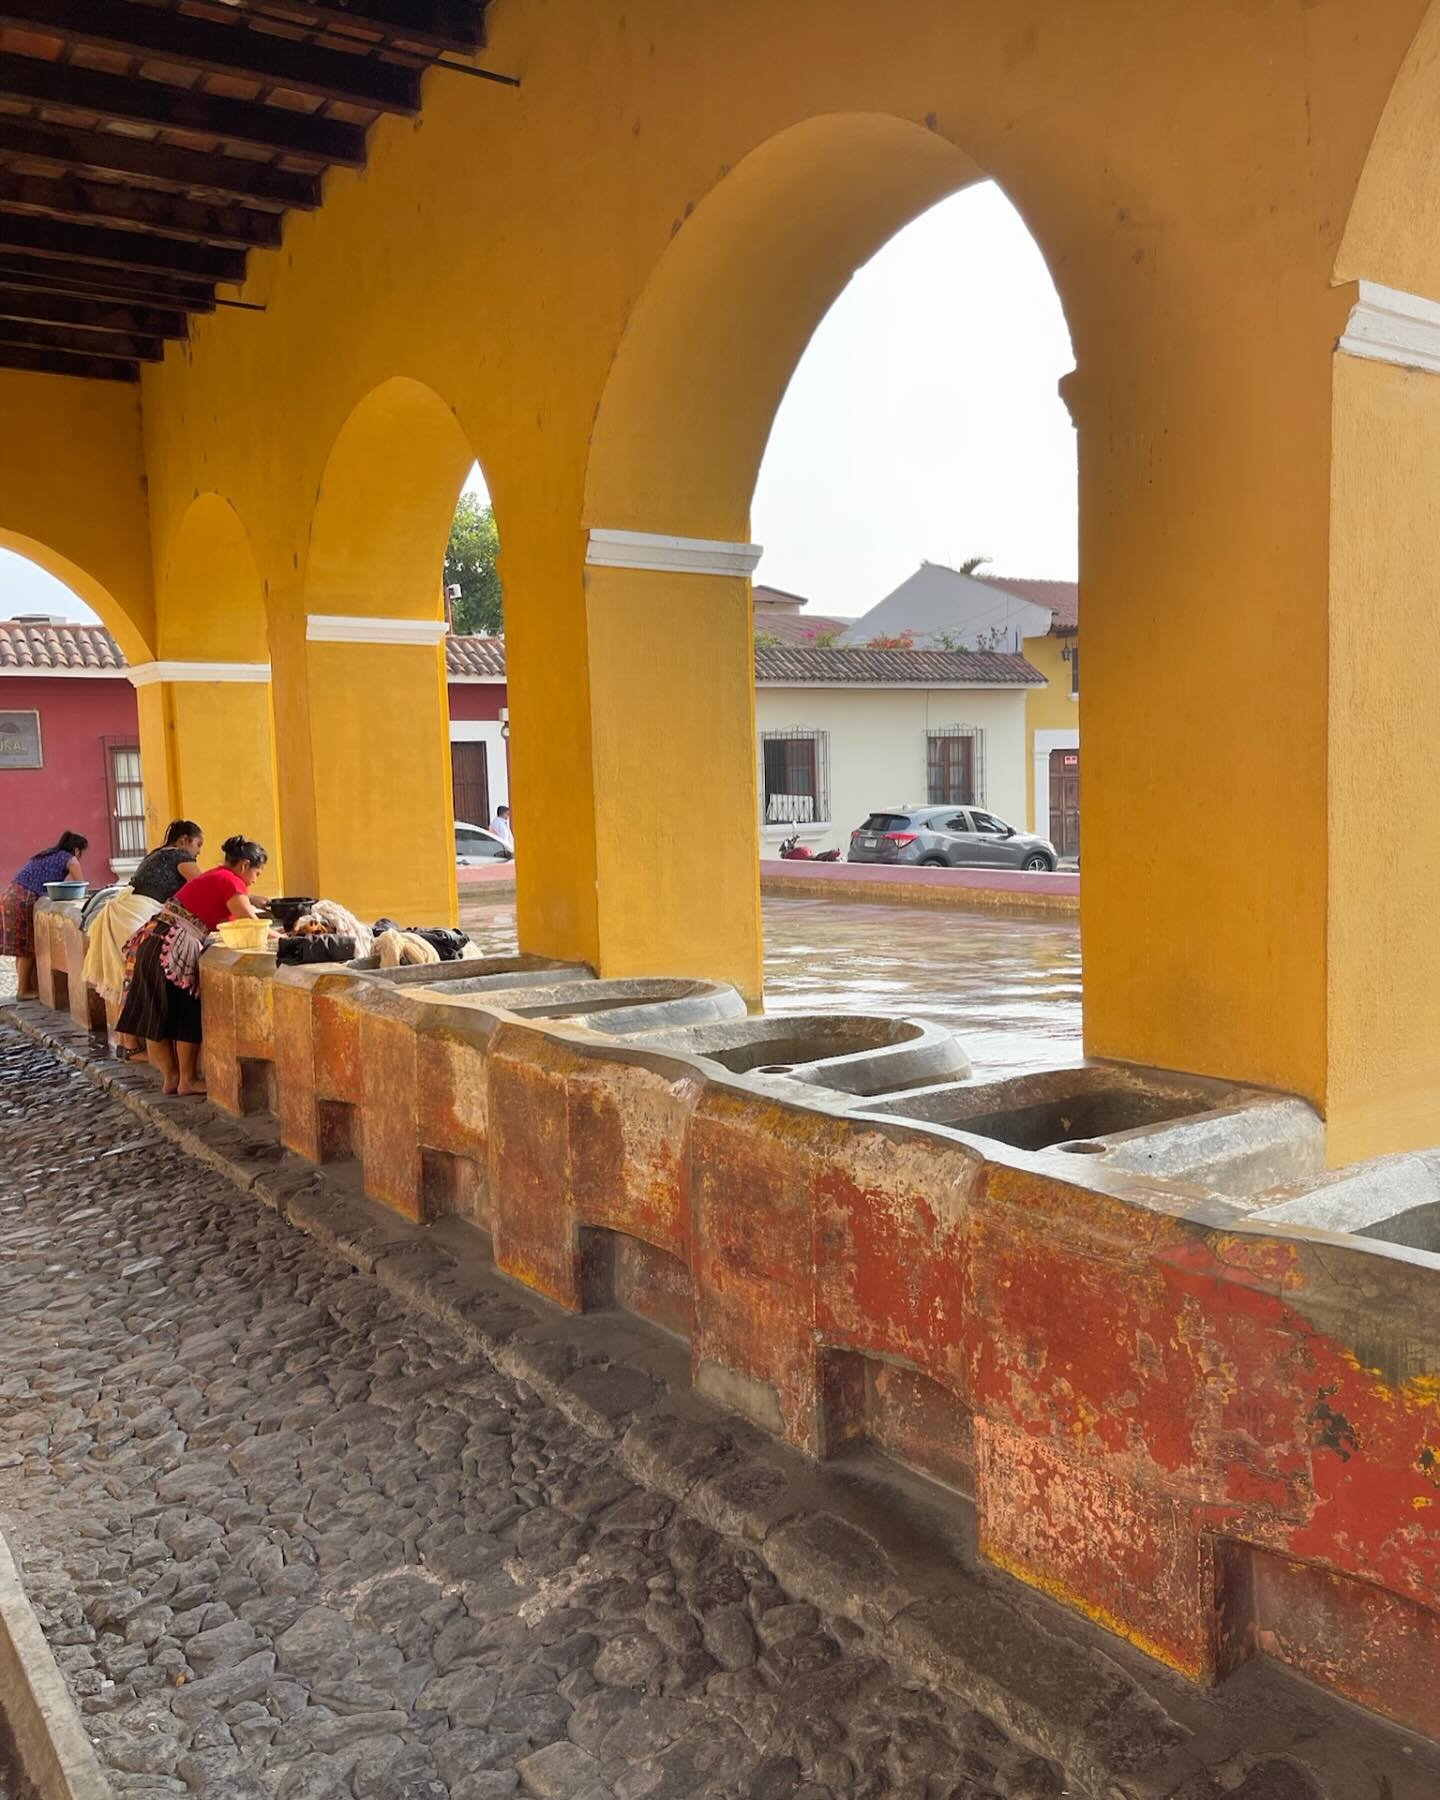 The beauty of Antigua, Guatemala is unparalleled. Thankfully protected as a UNESCO heritage site, the city&rsquo;s rich history as the old capital of Guatemala, and before,  of all of Mezoamerica (from Mexico through half of Panama) before being dest